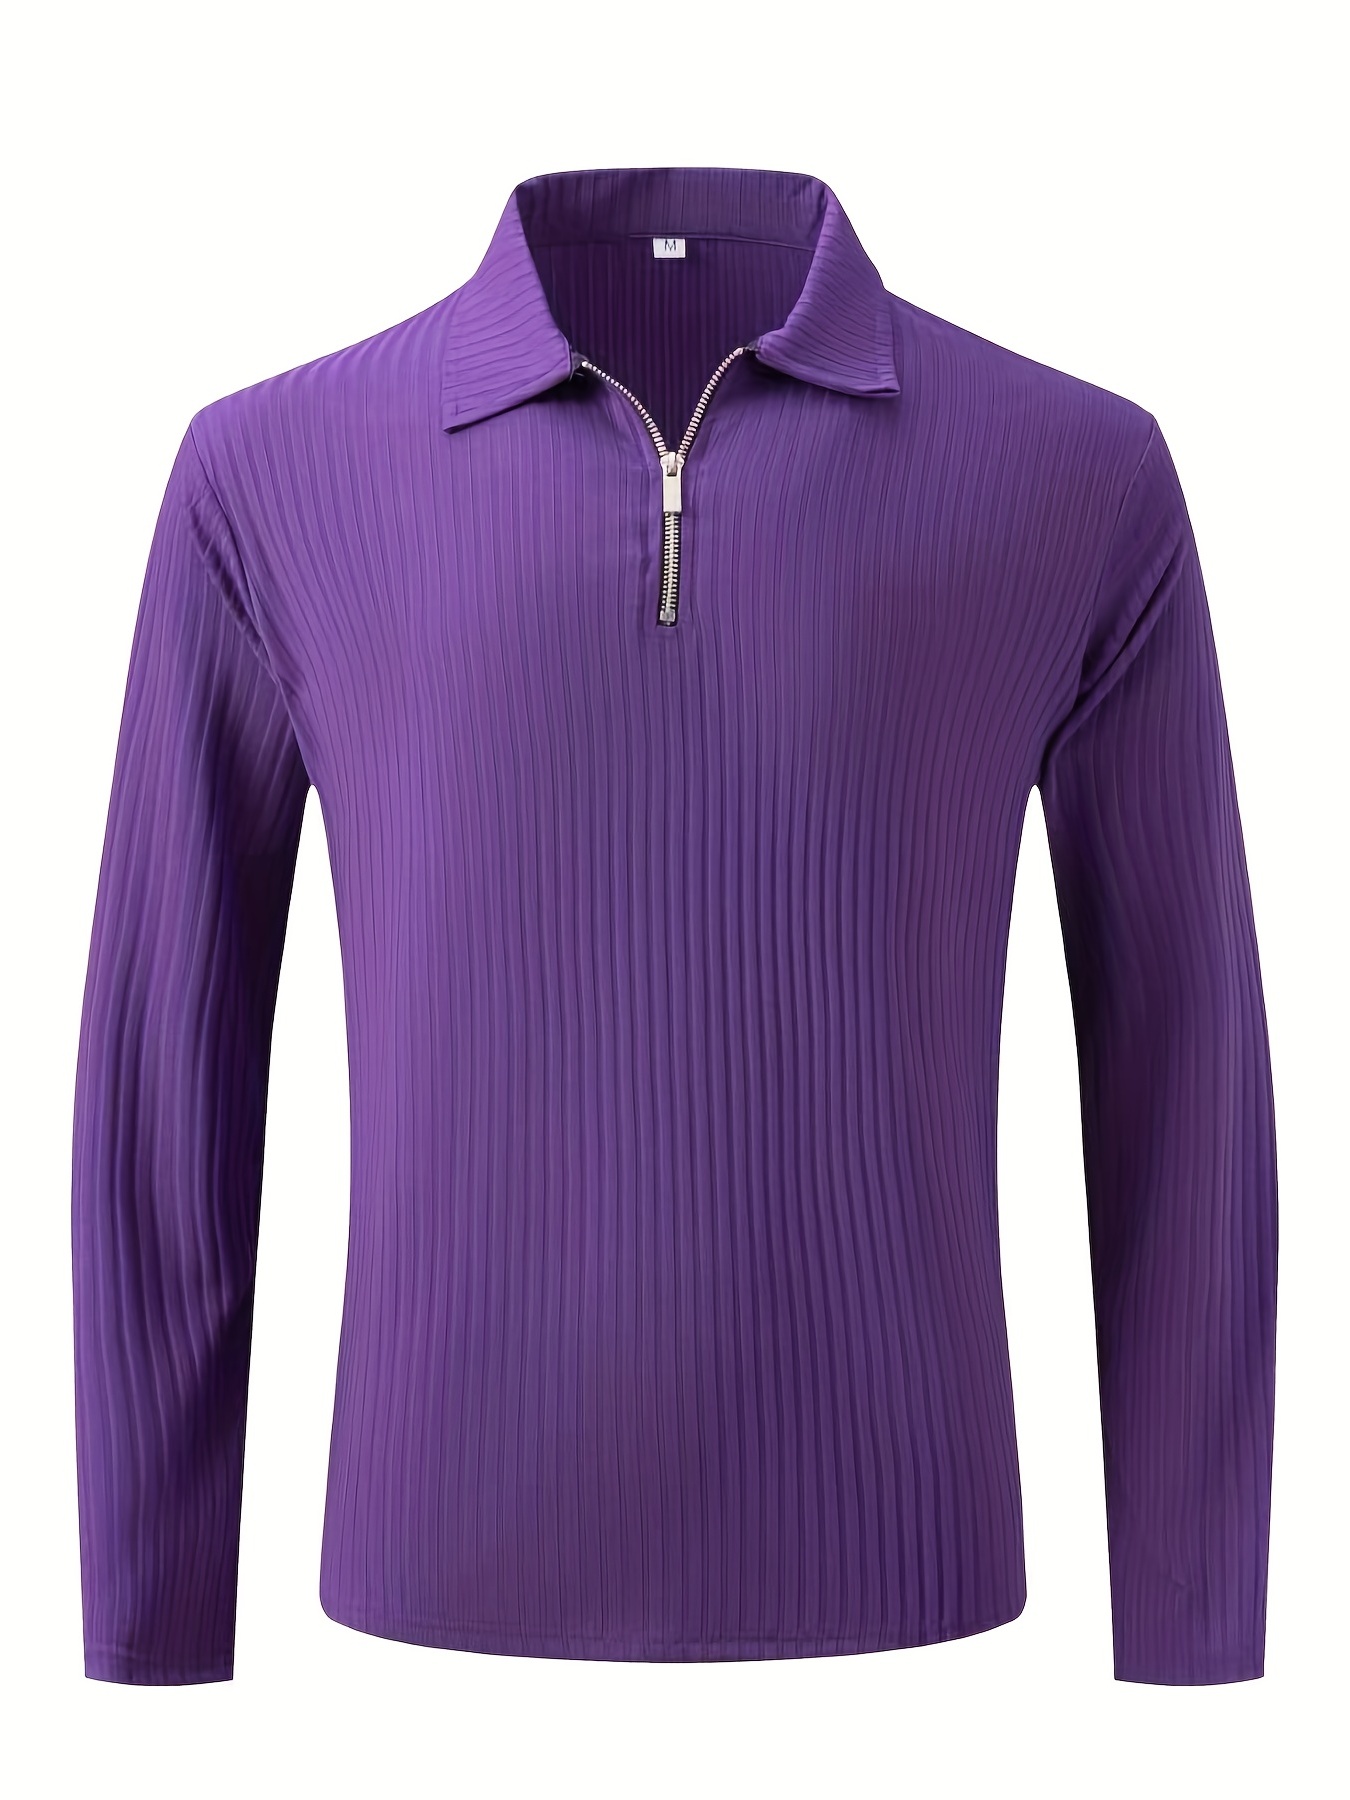 vertical stripe mens casual long sleeve zipper shirts lapel collar tops pullovers mens clothing for spring autumn purple 2